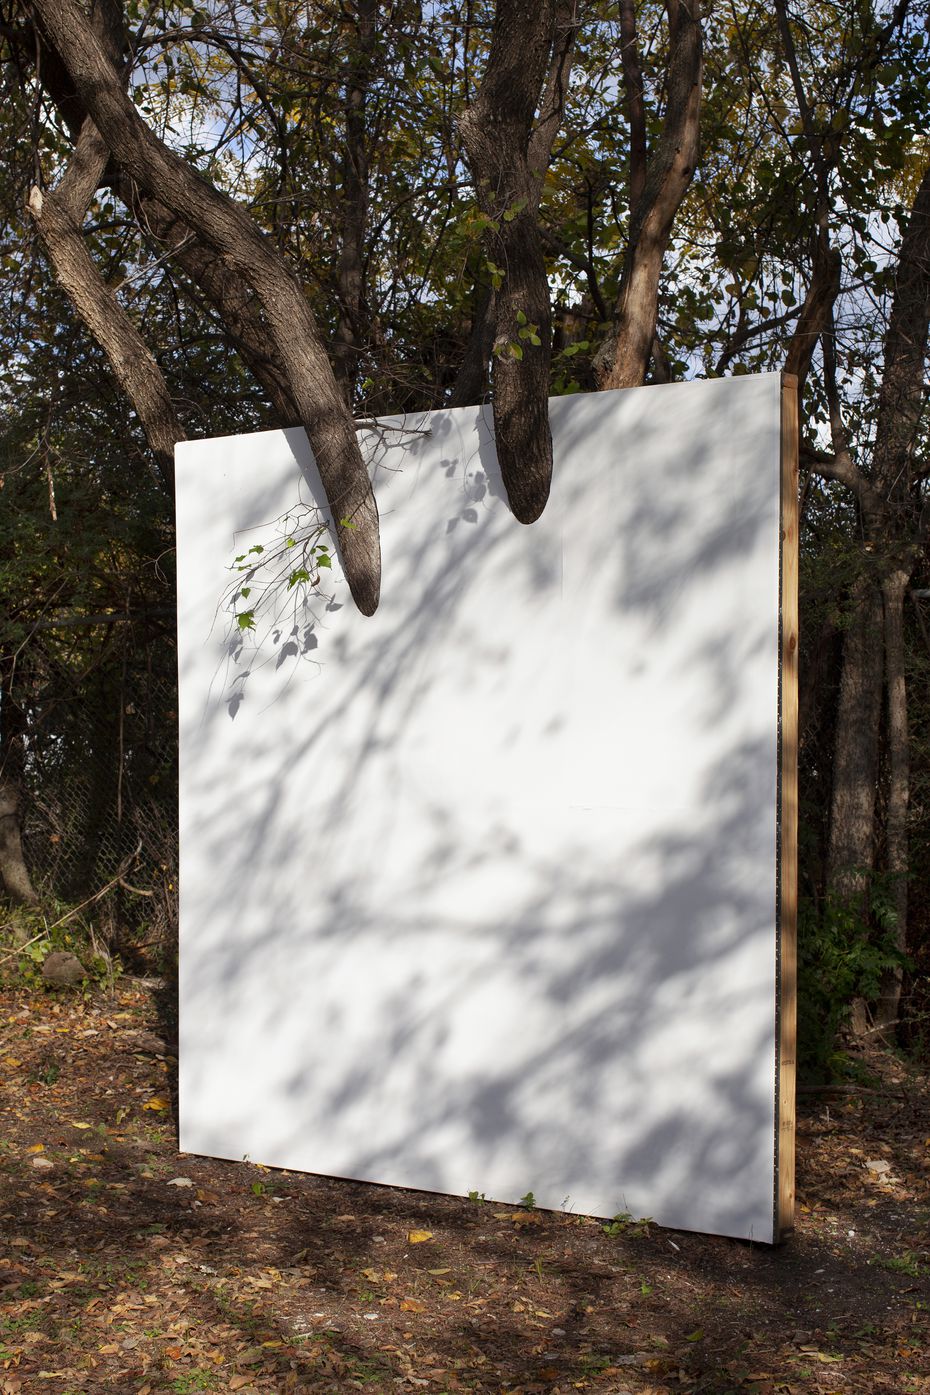 Letha Wilson's "Wall in Cedar Elm Tree" features a white wall with two enormous branches and...